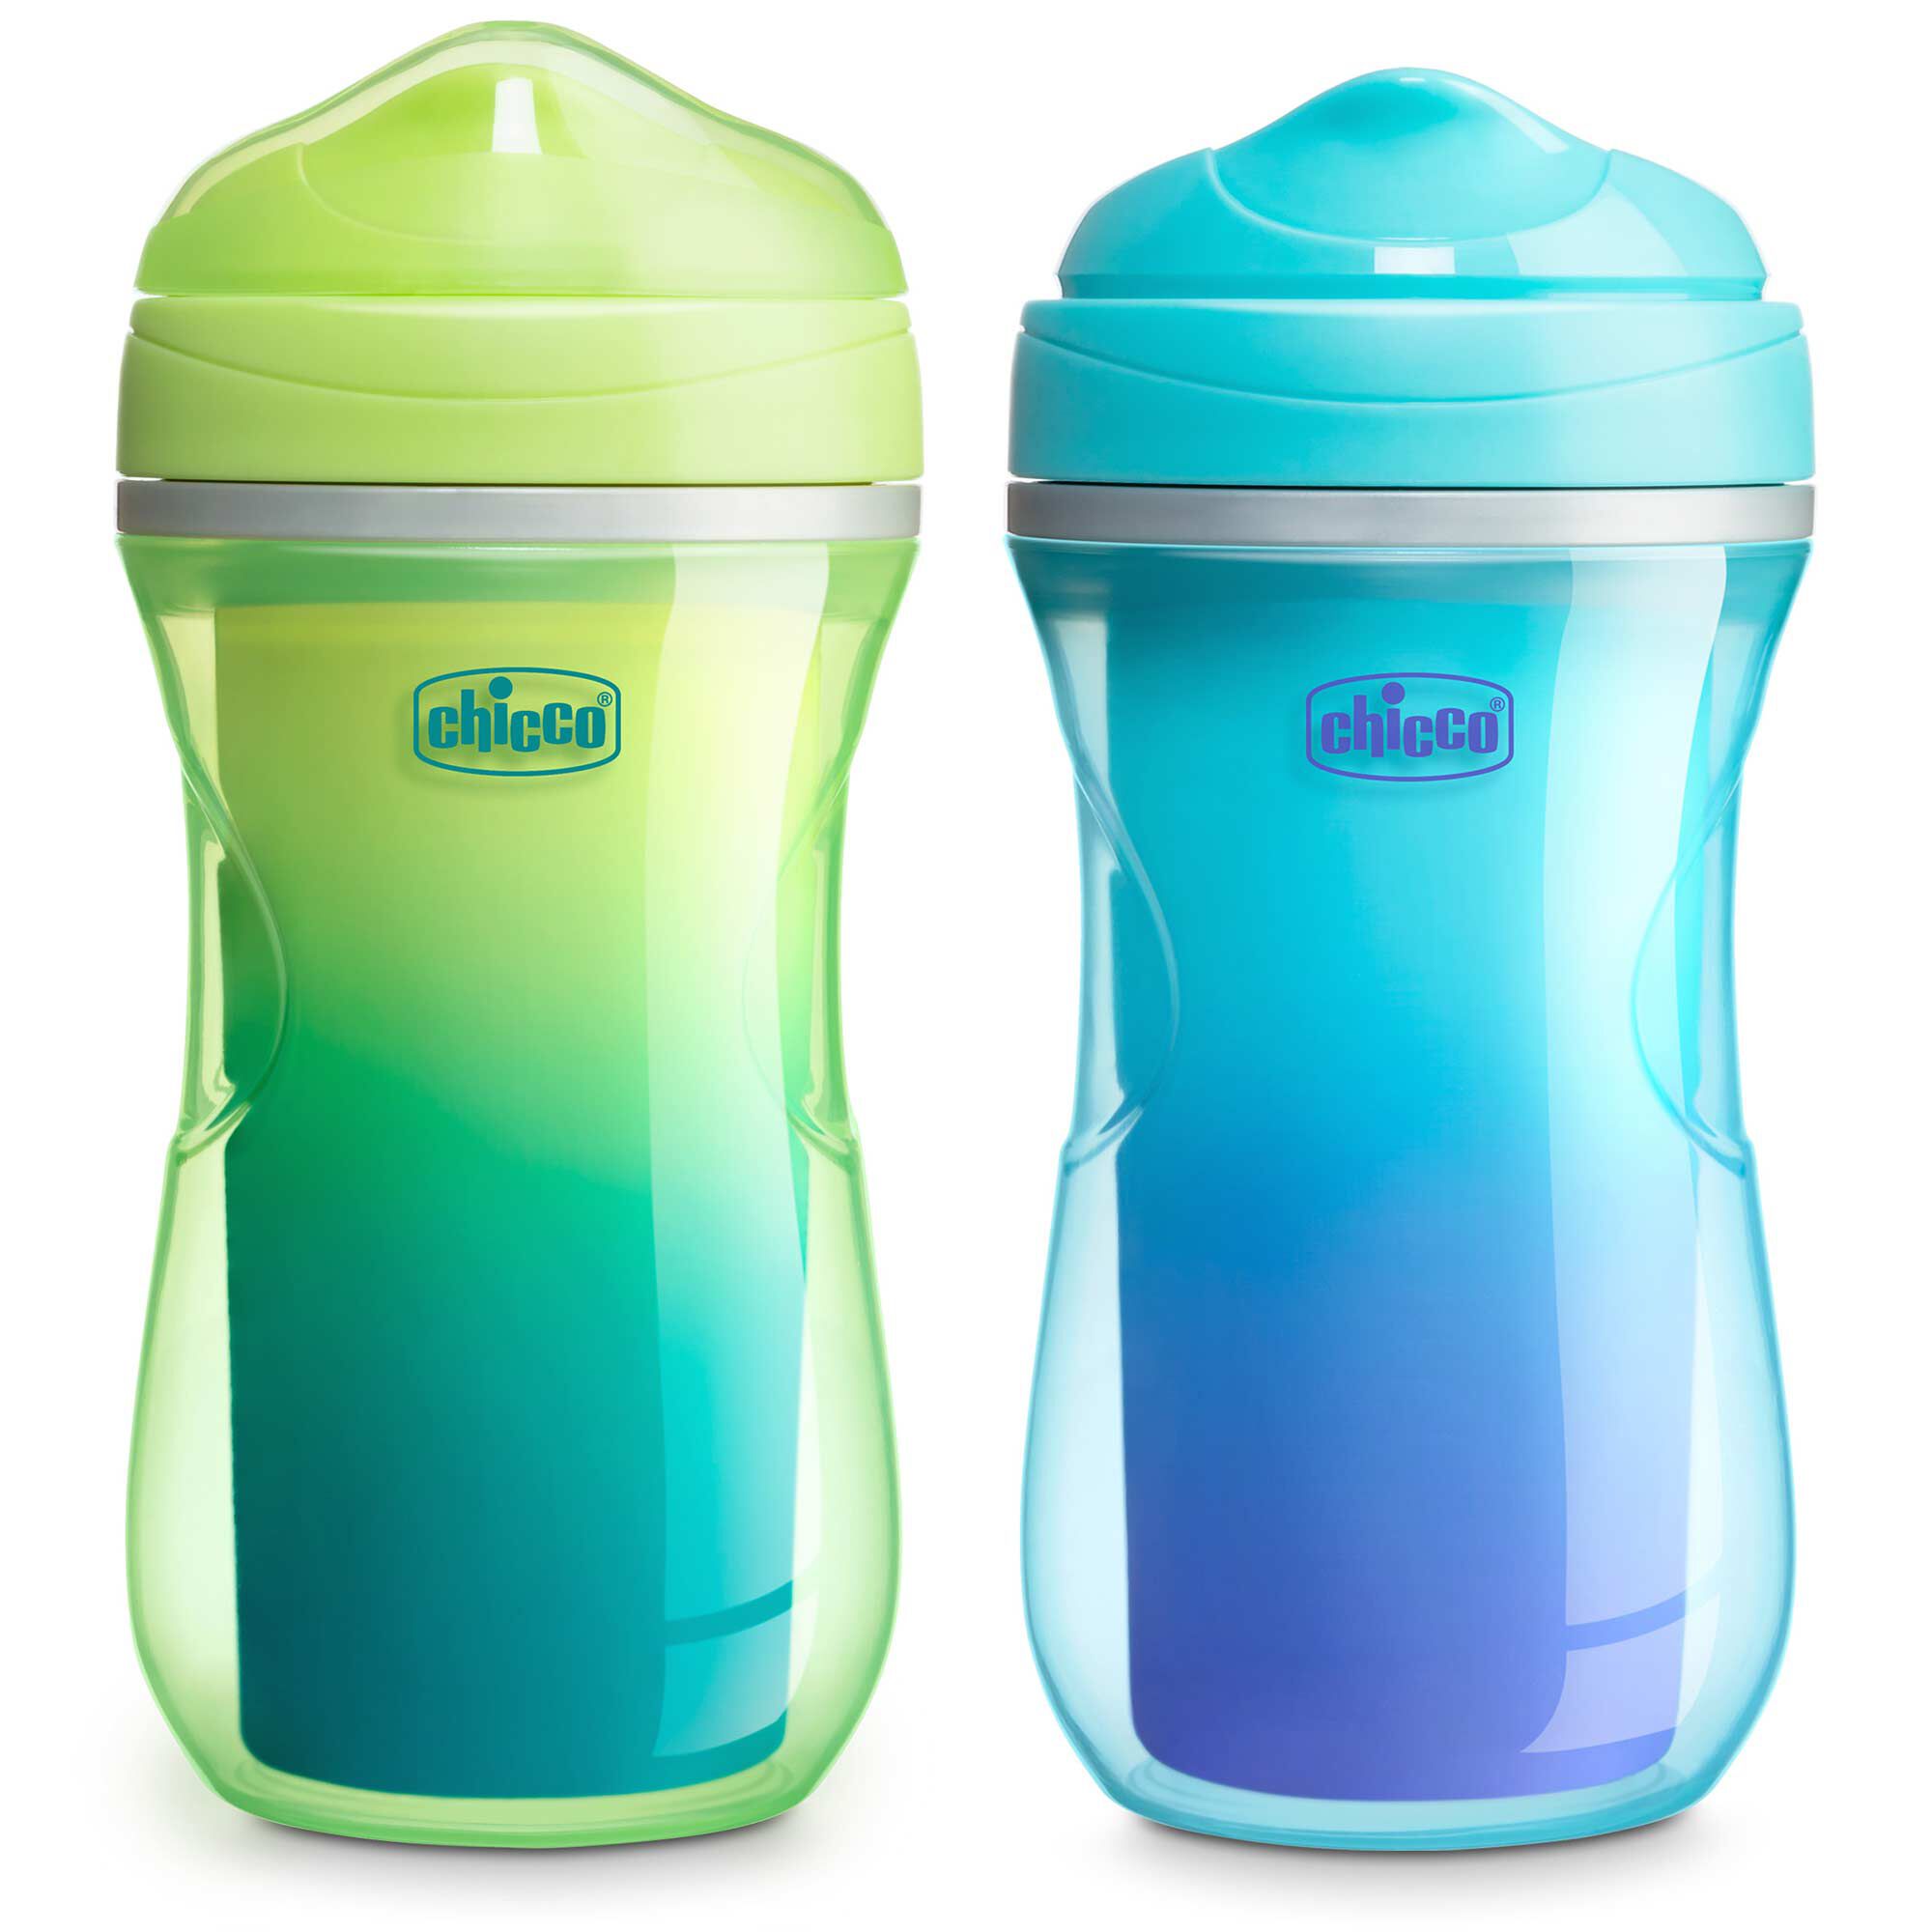 https://www.chiccousa.com/dw/image/v2/AAMT_PRD/on/demandware.static/-/Sites-chicco_catalog/default/dw5a5b11a9/images/products/feeding/insulated-rim/chicco-insulated-rim-spout-trainer-green-teal-ombre.jpg?sw=2000&sh=2000&sm=fit